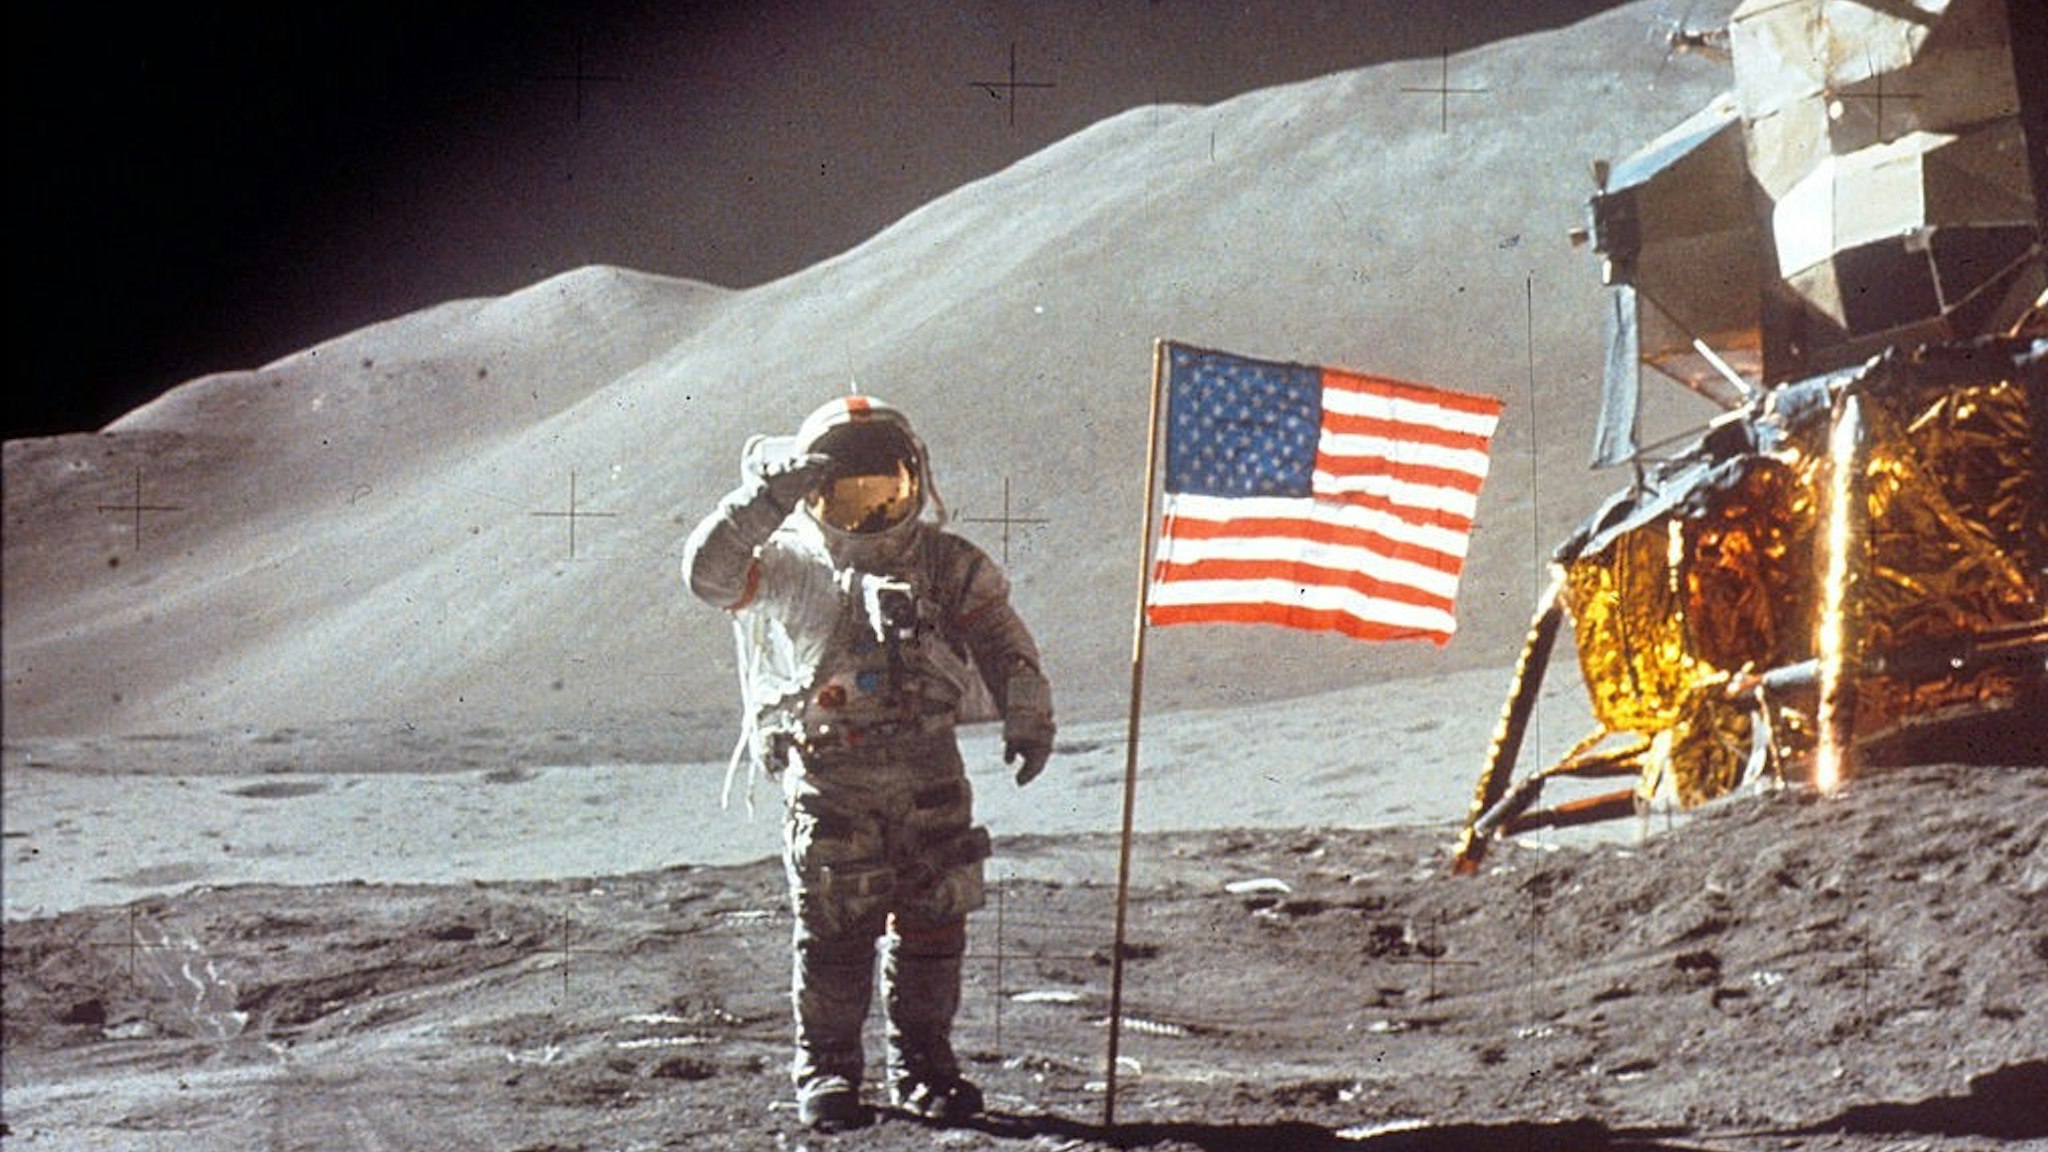 060280 01: Astronaut David Scott gives salute beside the U.S. flag July 30, 1971 on the moon during the Apollo 15 mission. (Photo by